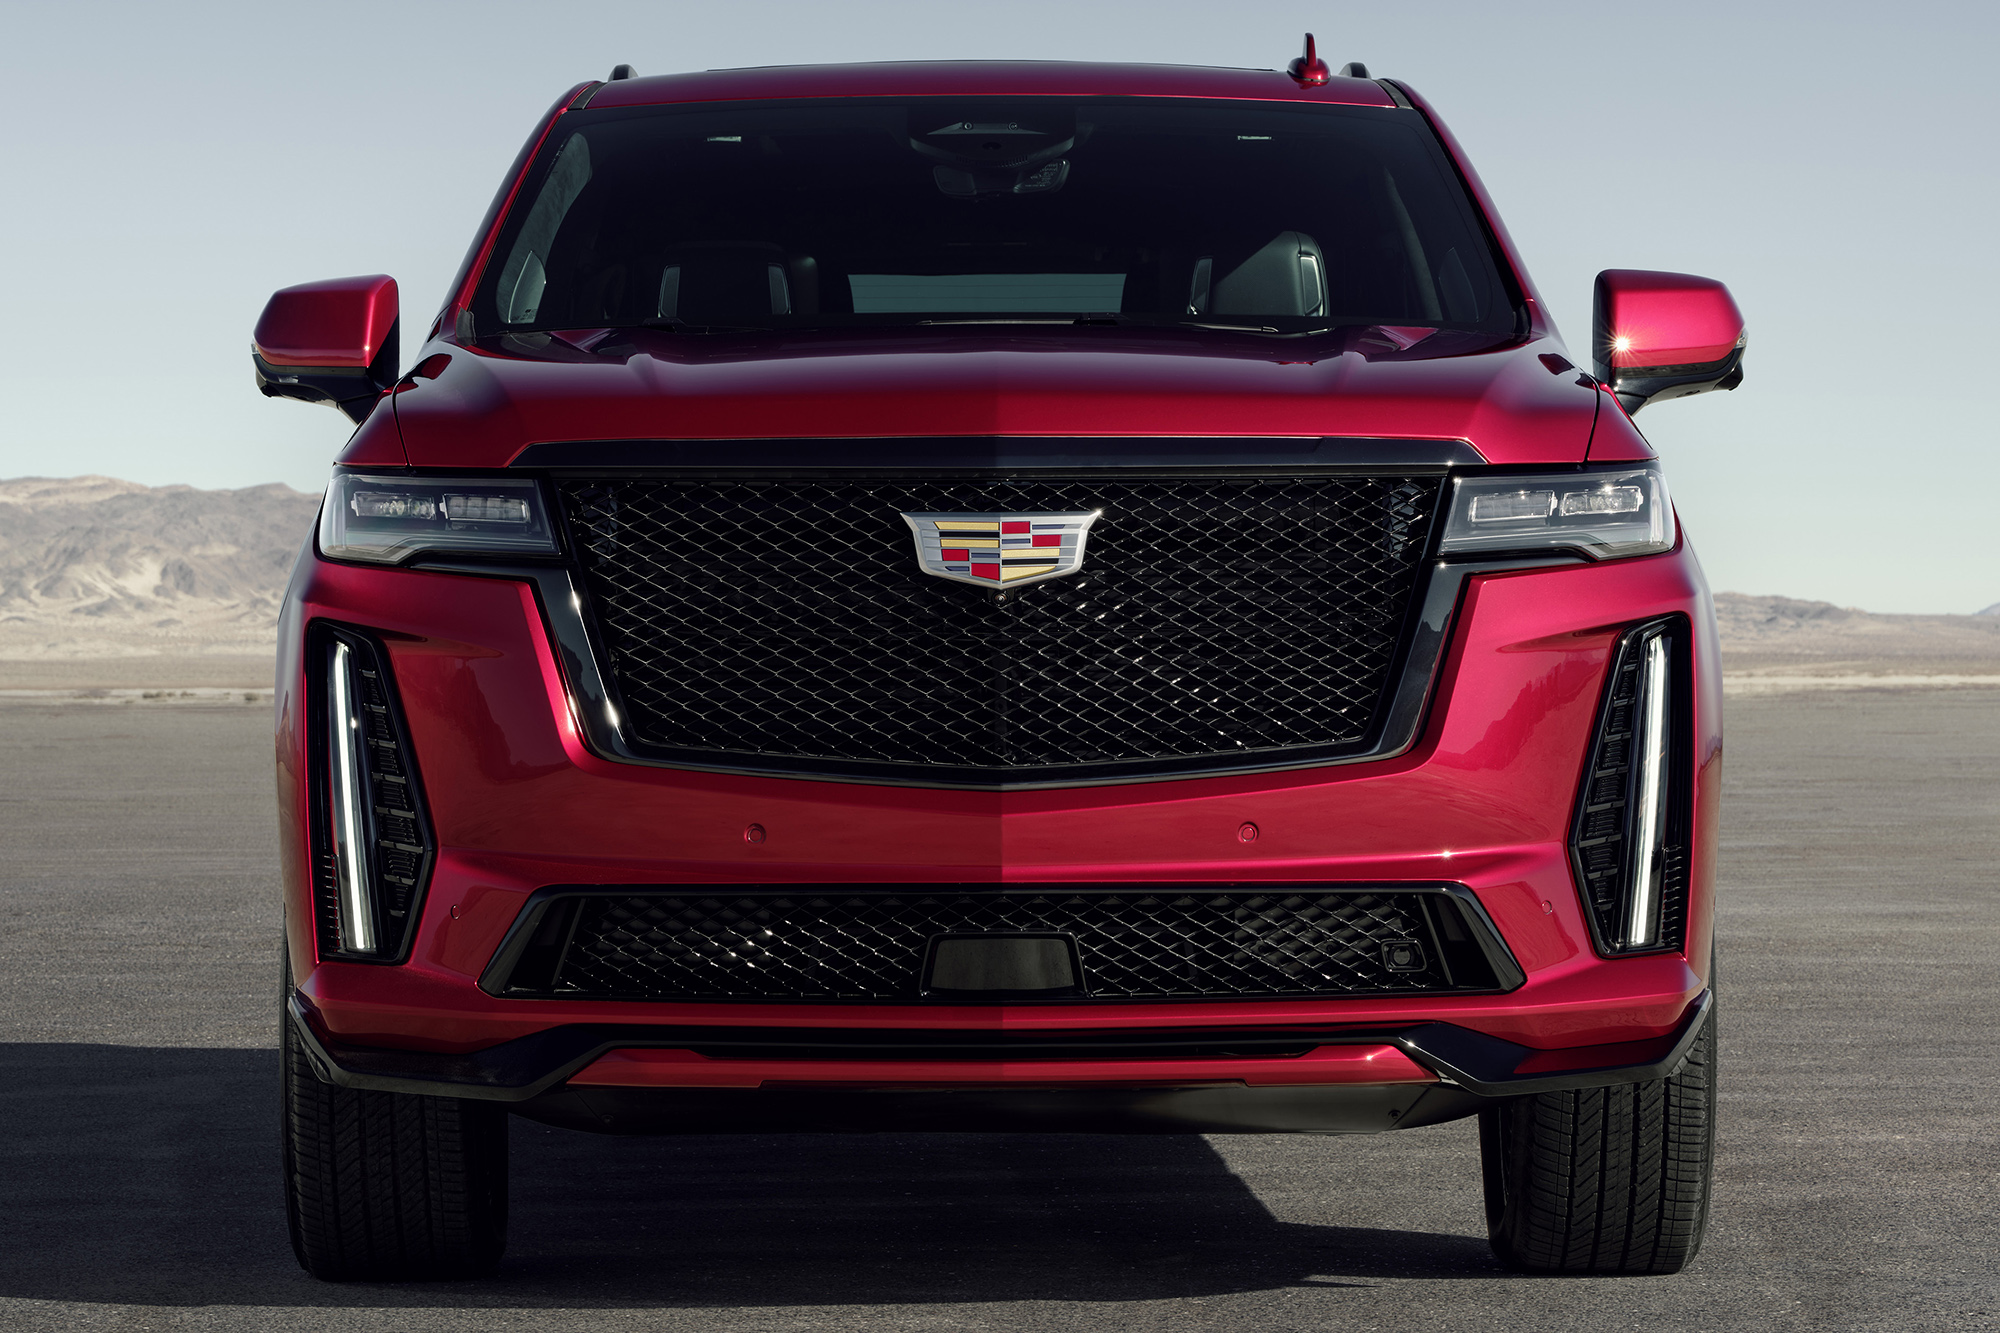 The 2023 Cadillac Escalade will be the first SUV to don the high-performance V-Series badge. Preproduction model shown. Actual production model will vary. Escalade-V availability will be announced spring 2022.